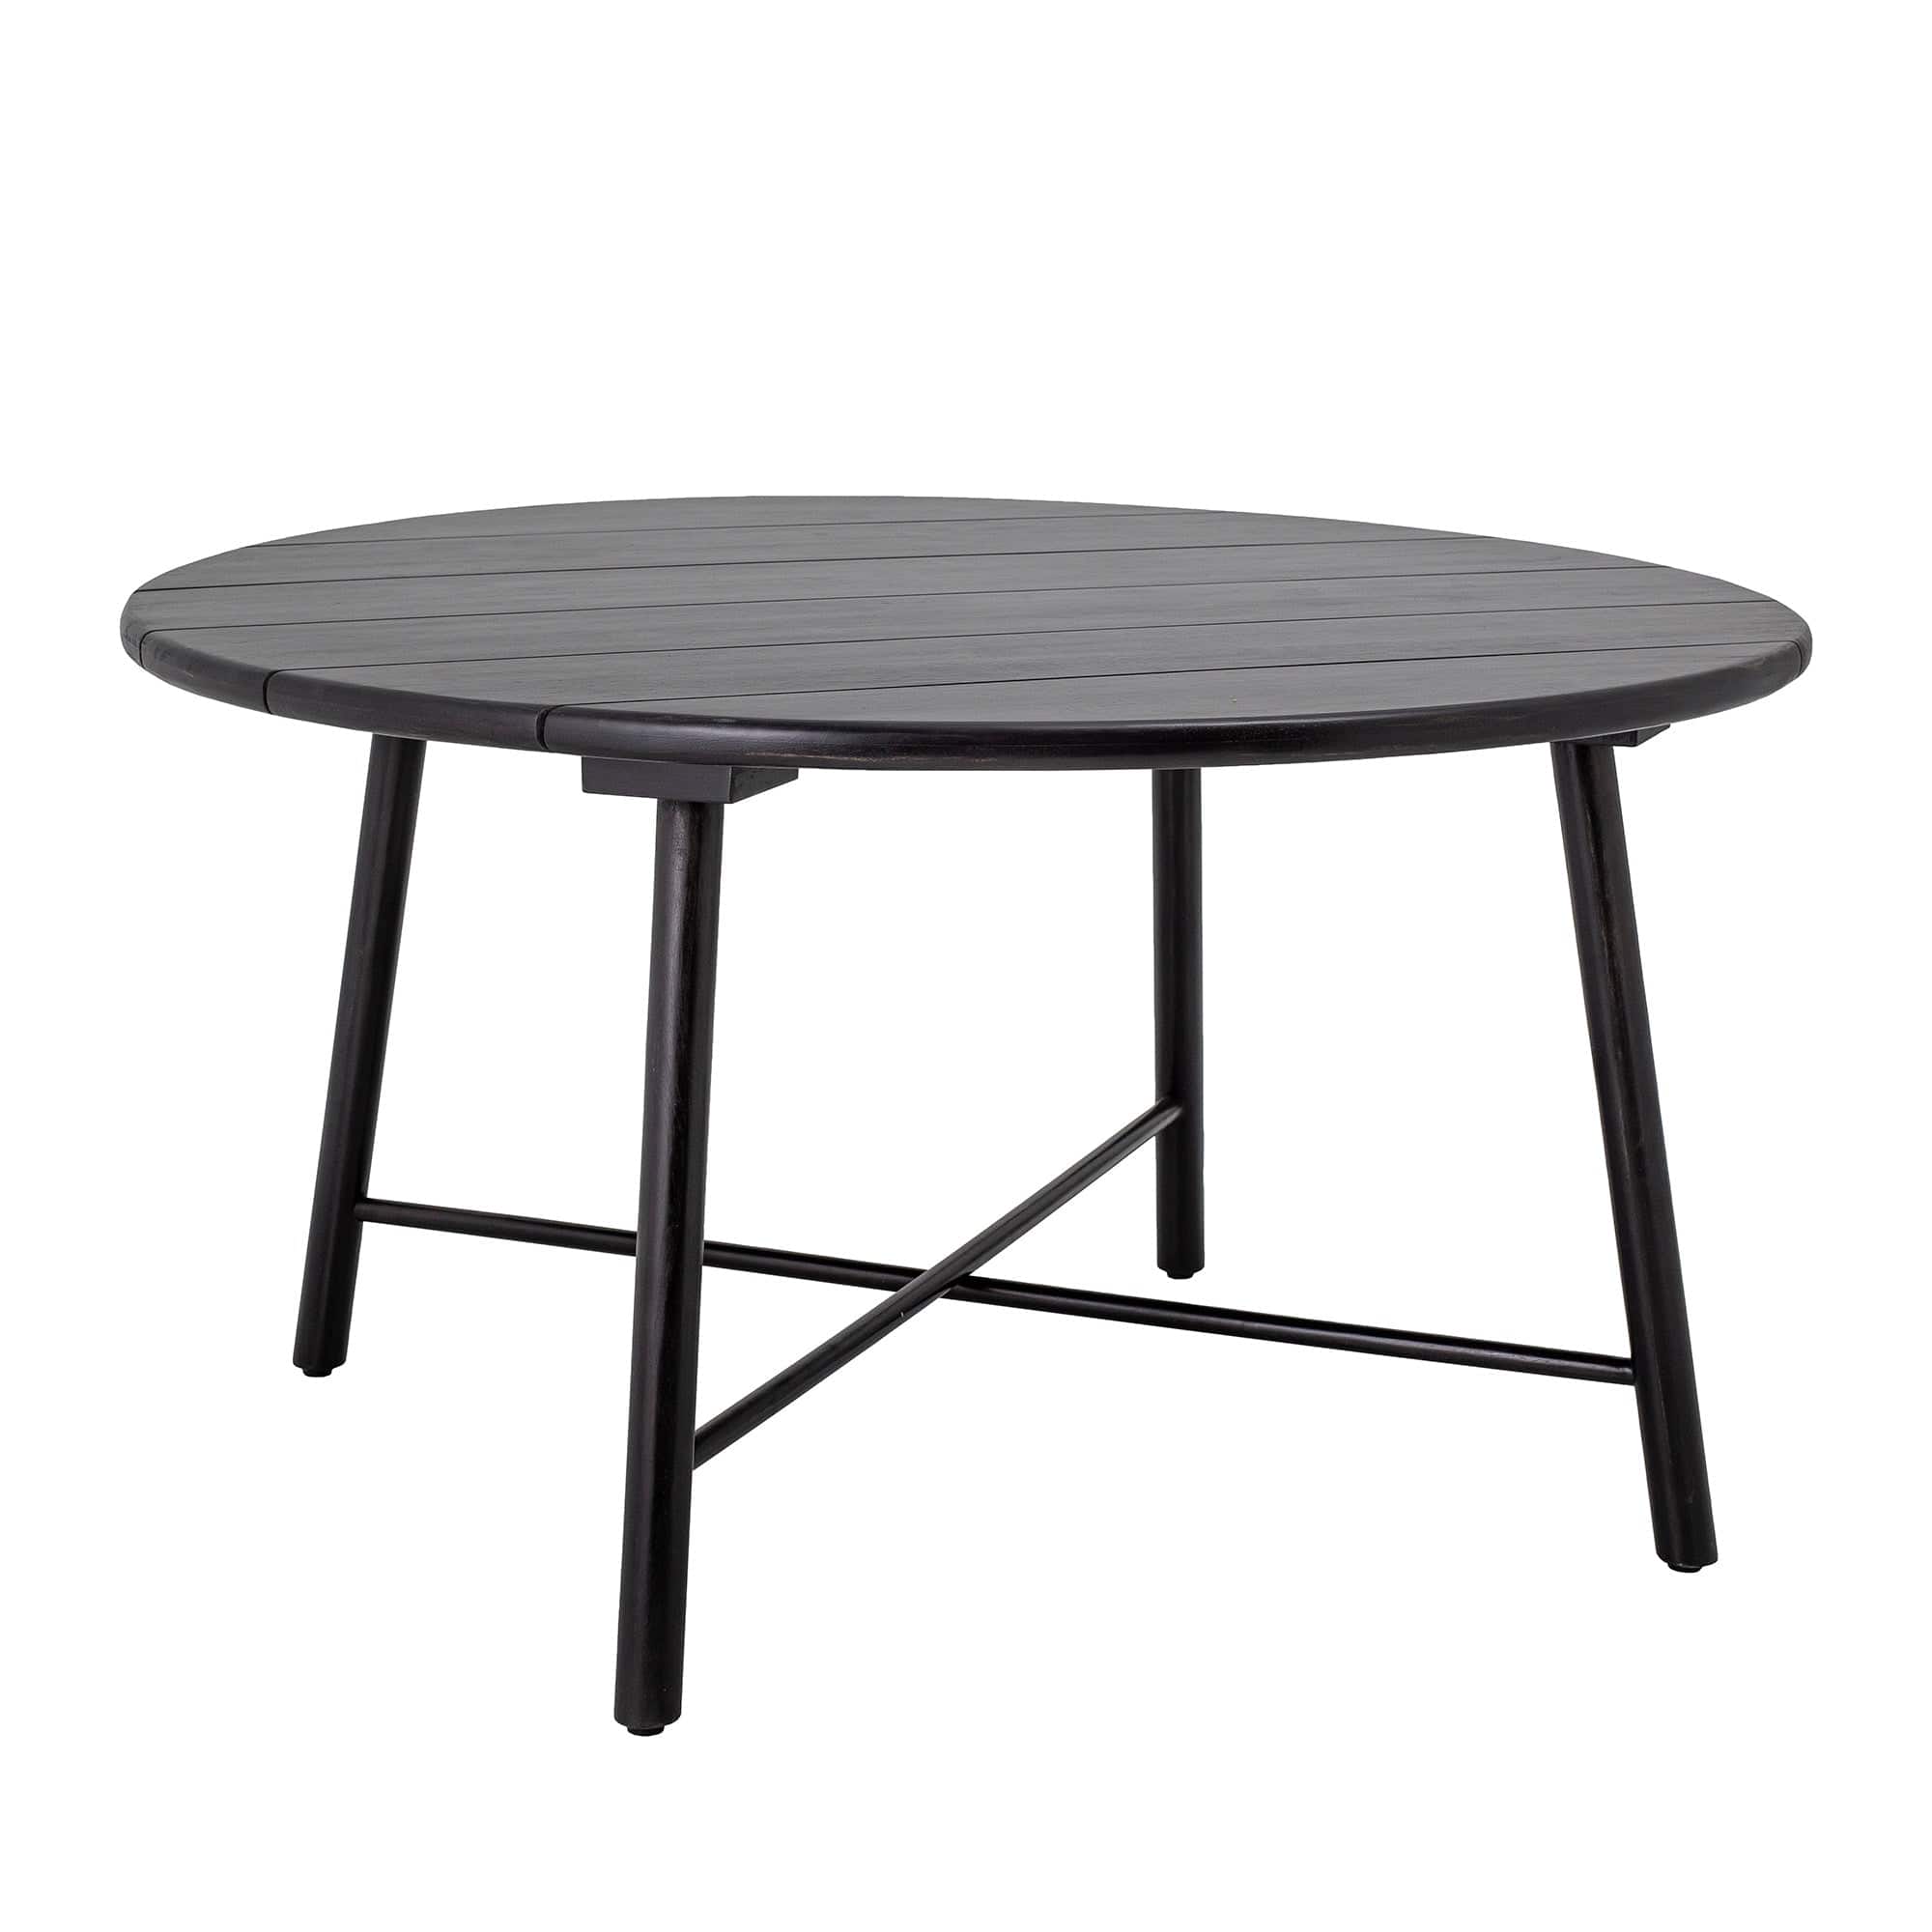 Lope Dining Table - THAT COOL LIVING